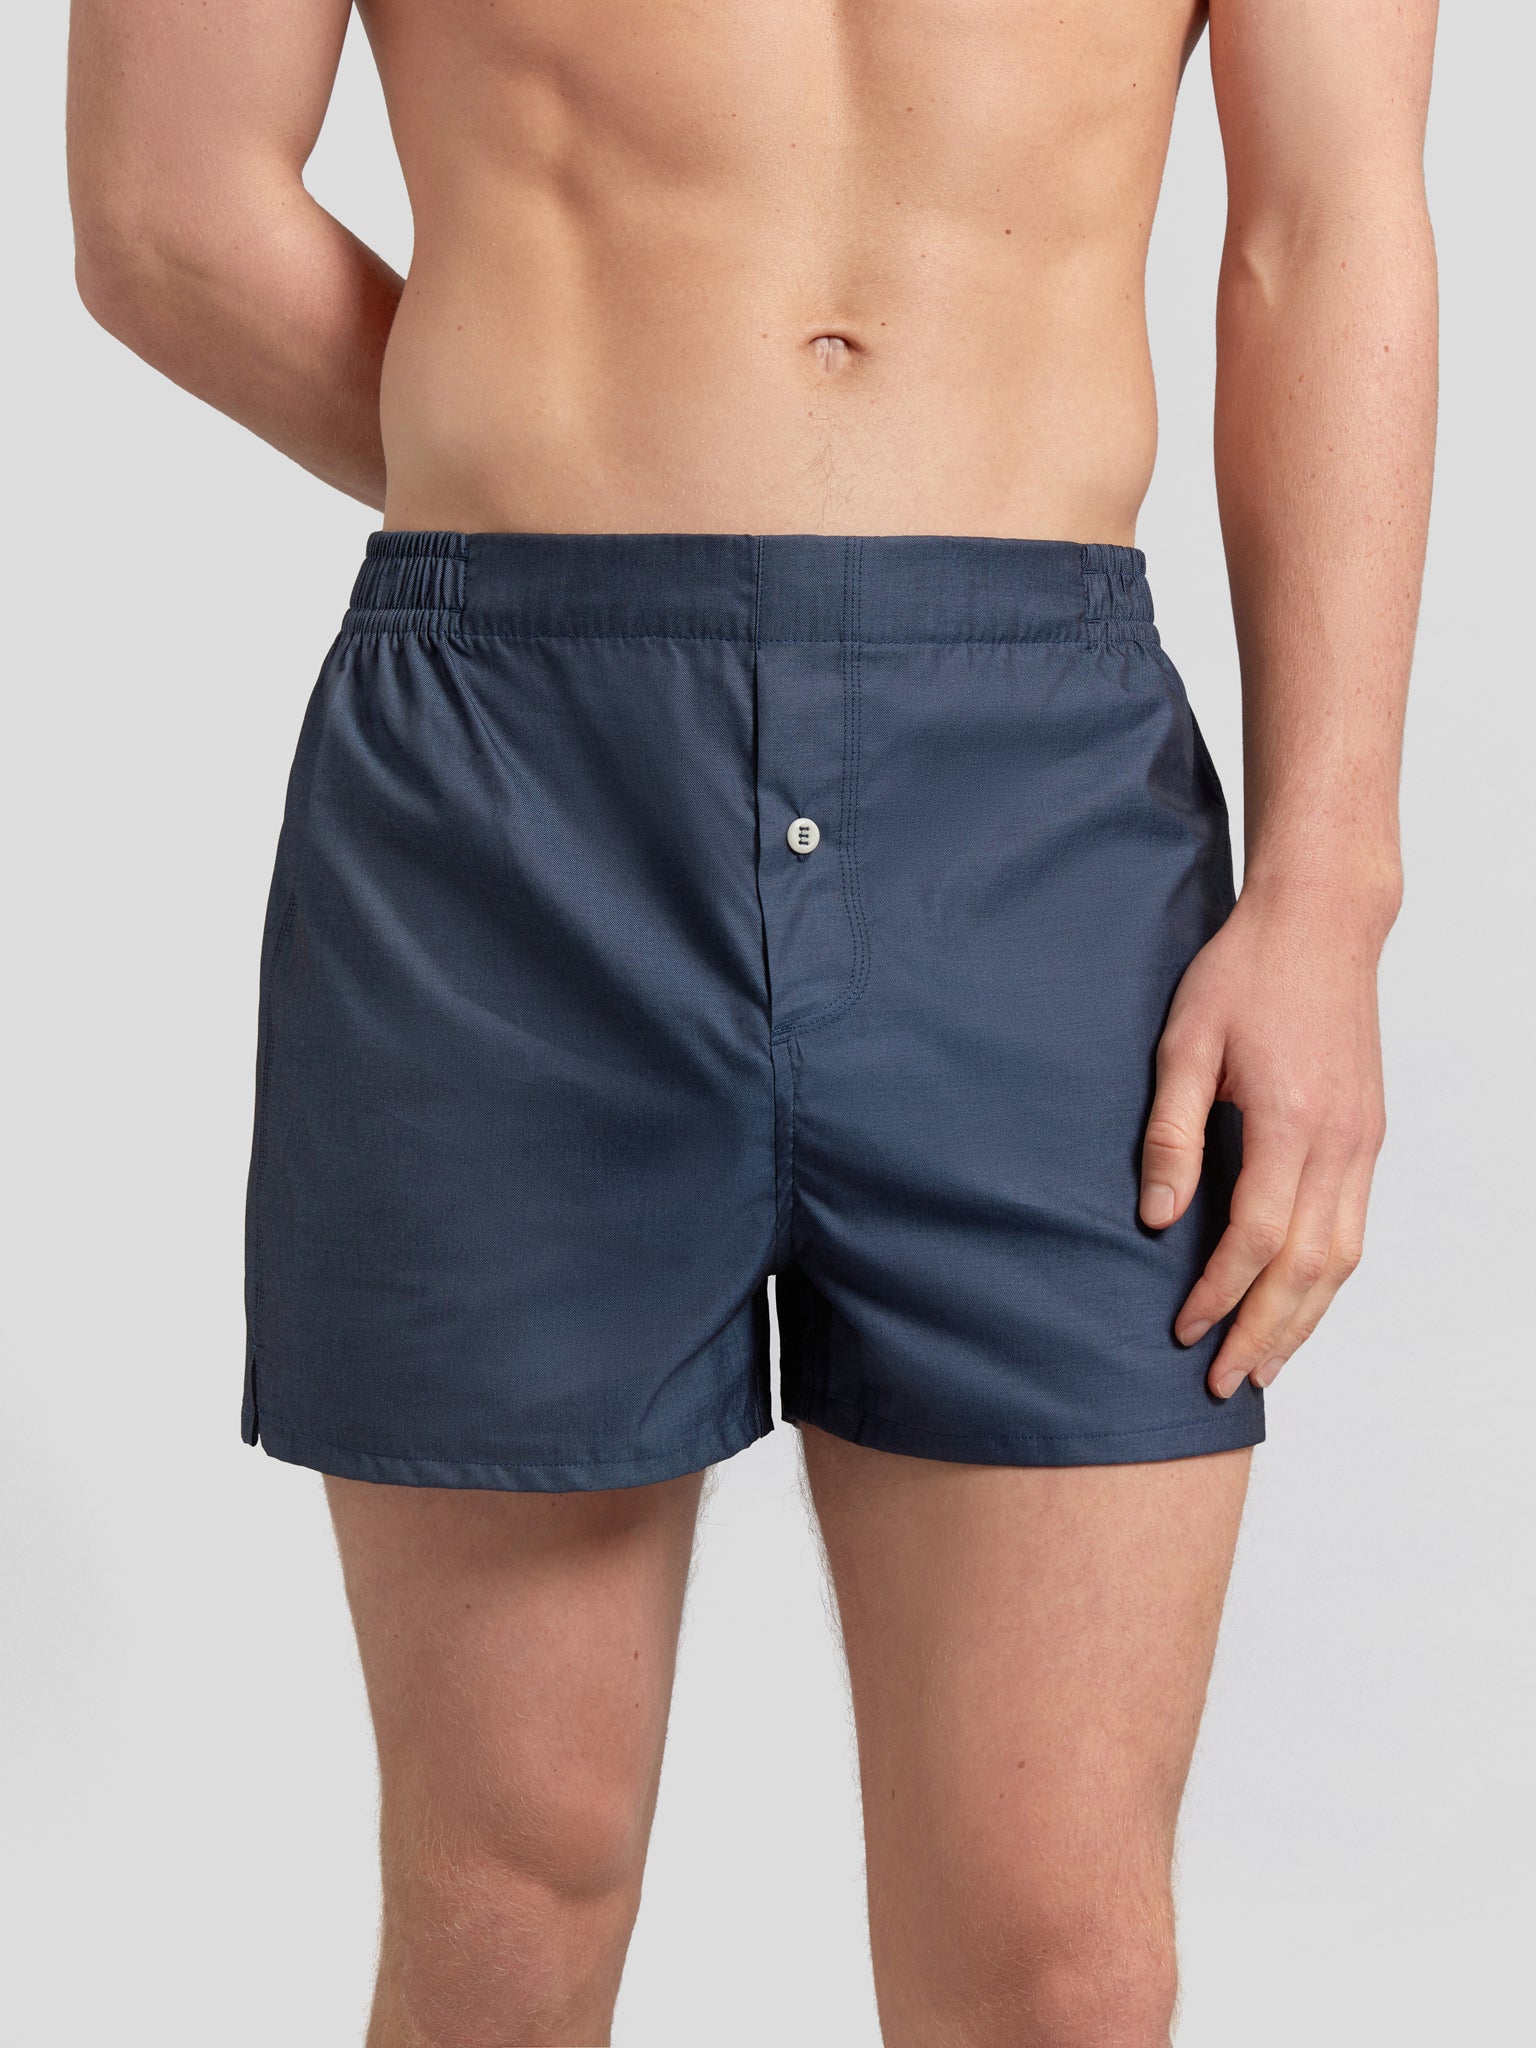 The Pick: Hamilton and Hare's knockout boxer shorts